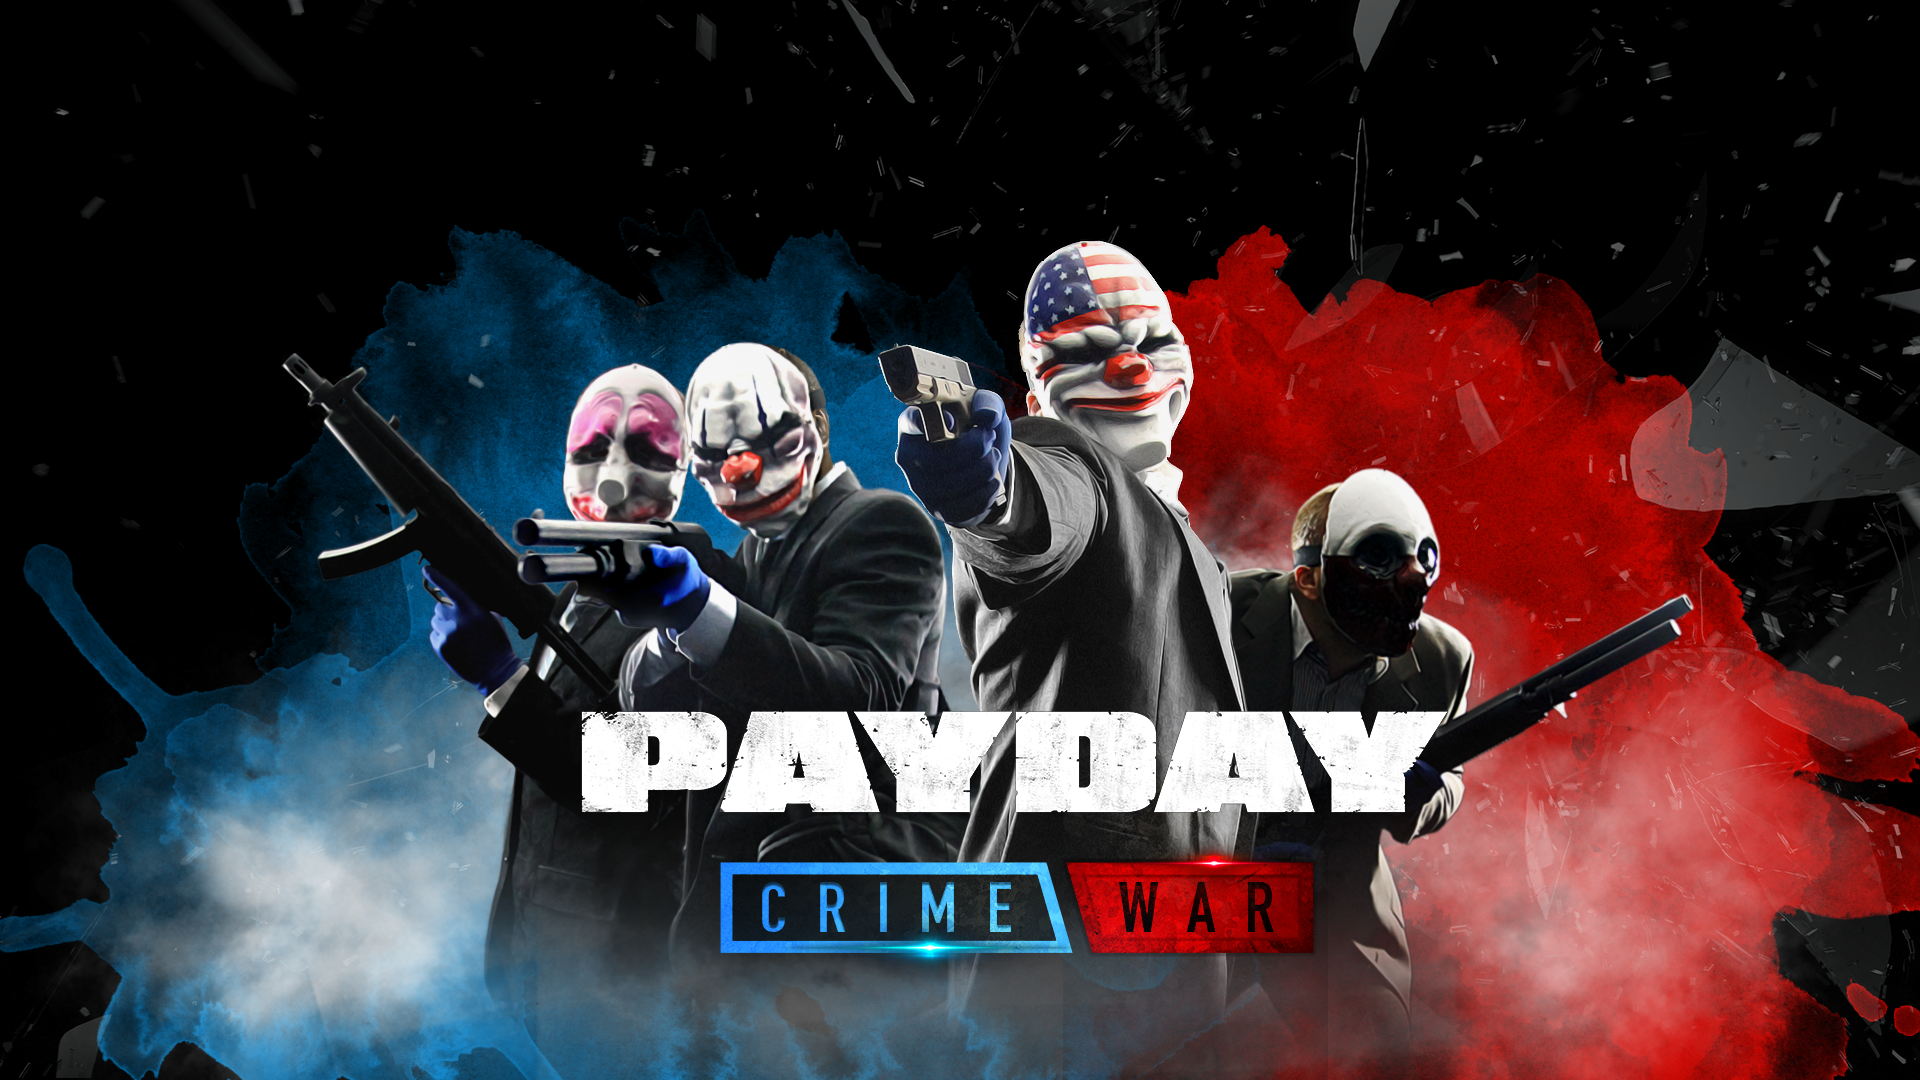 PAYDAY: Crime War is finally available in select regions